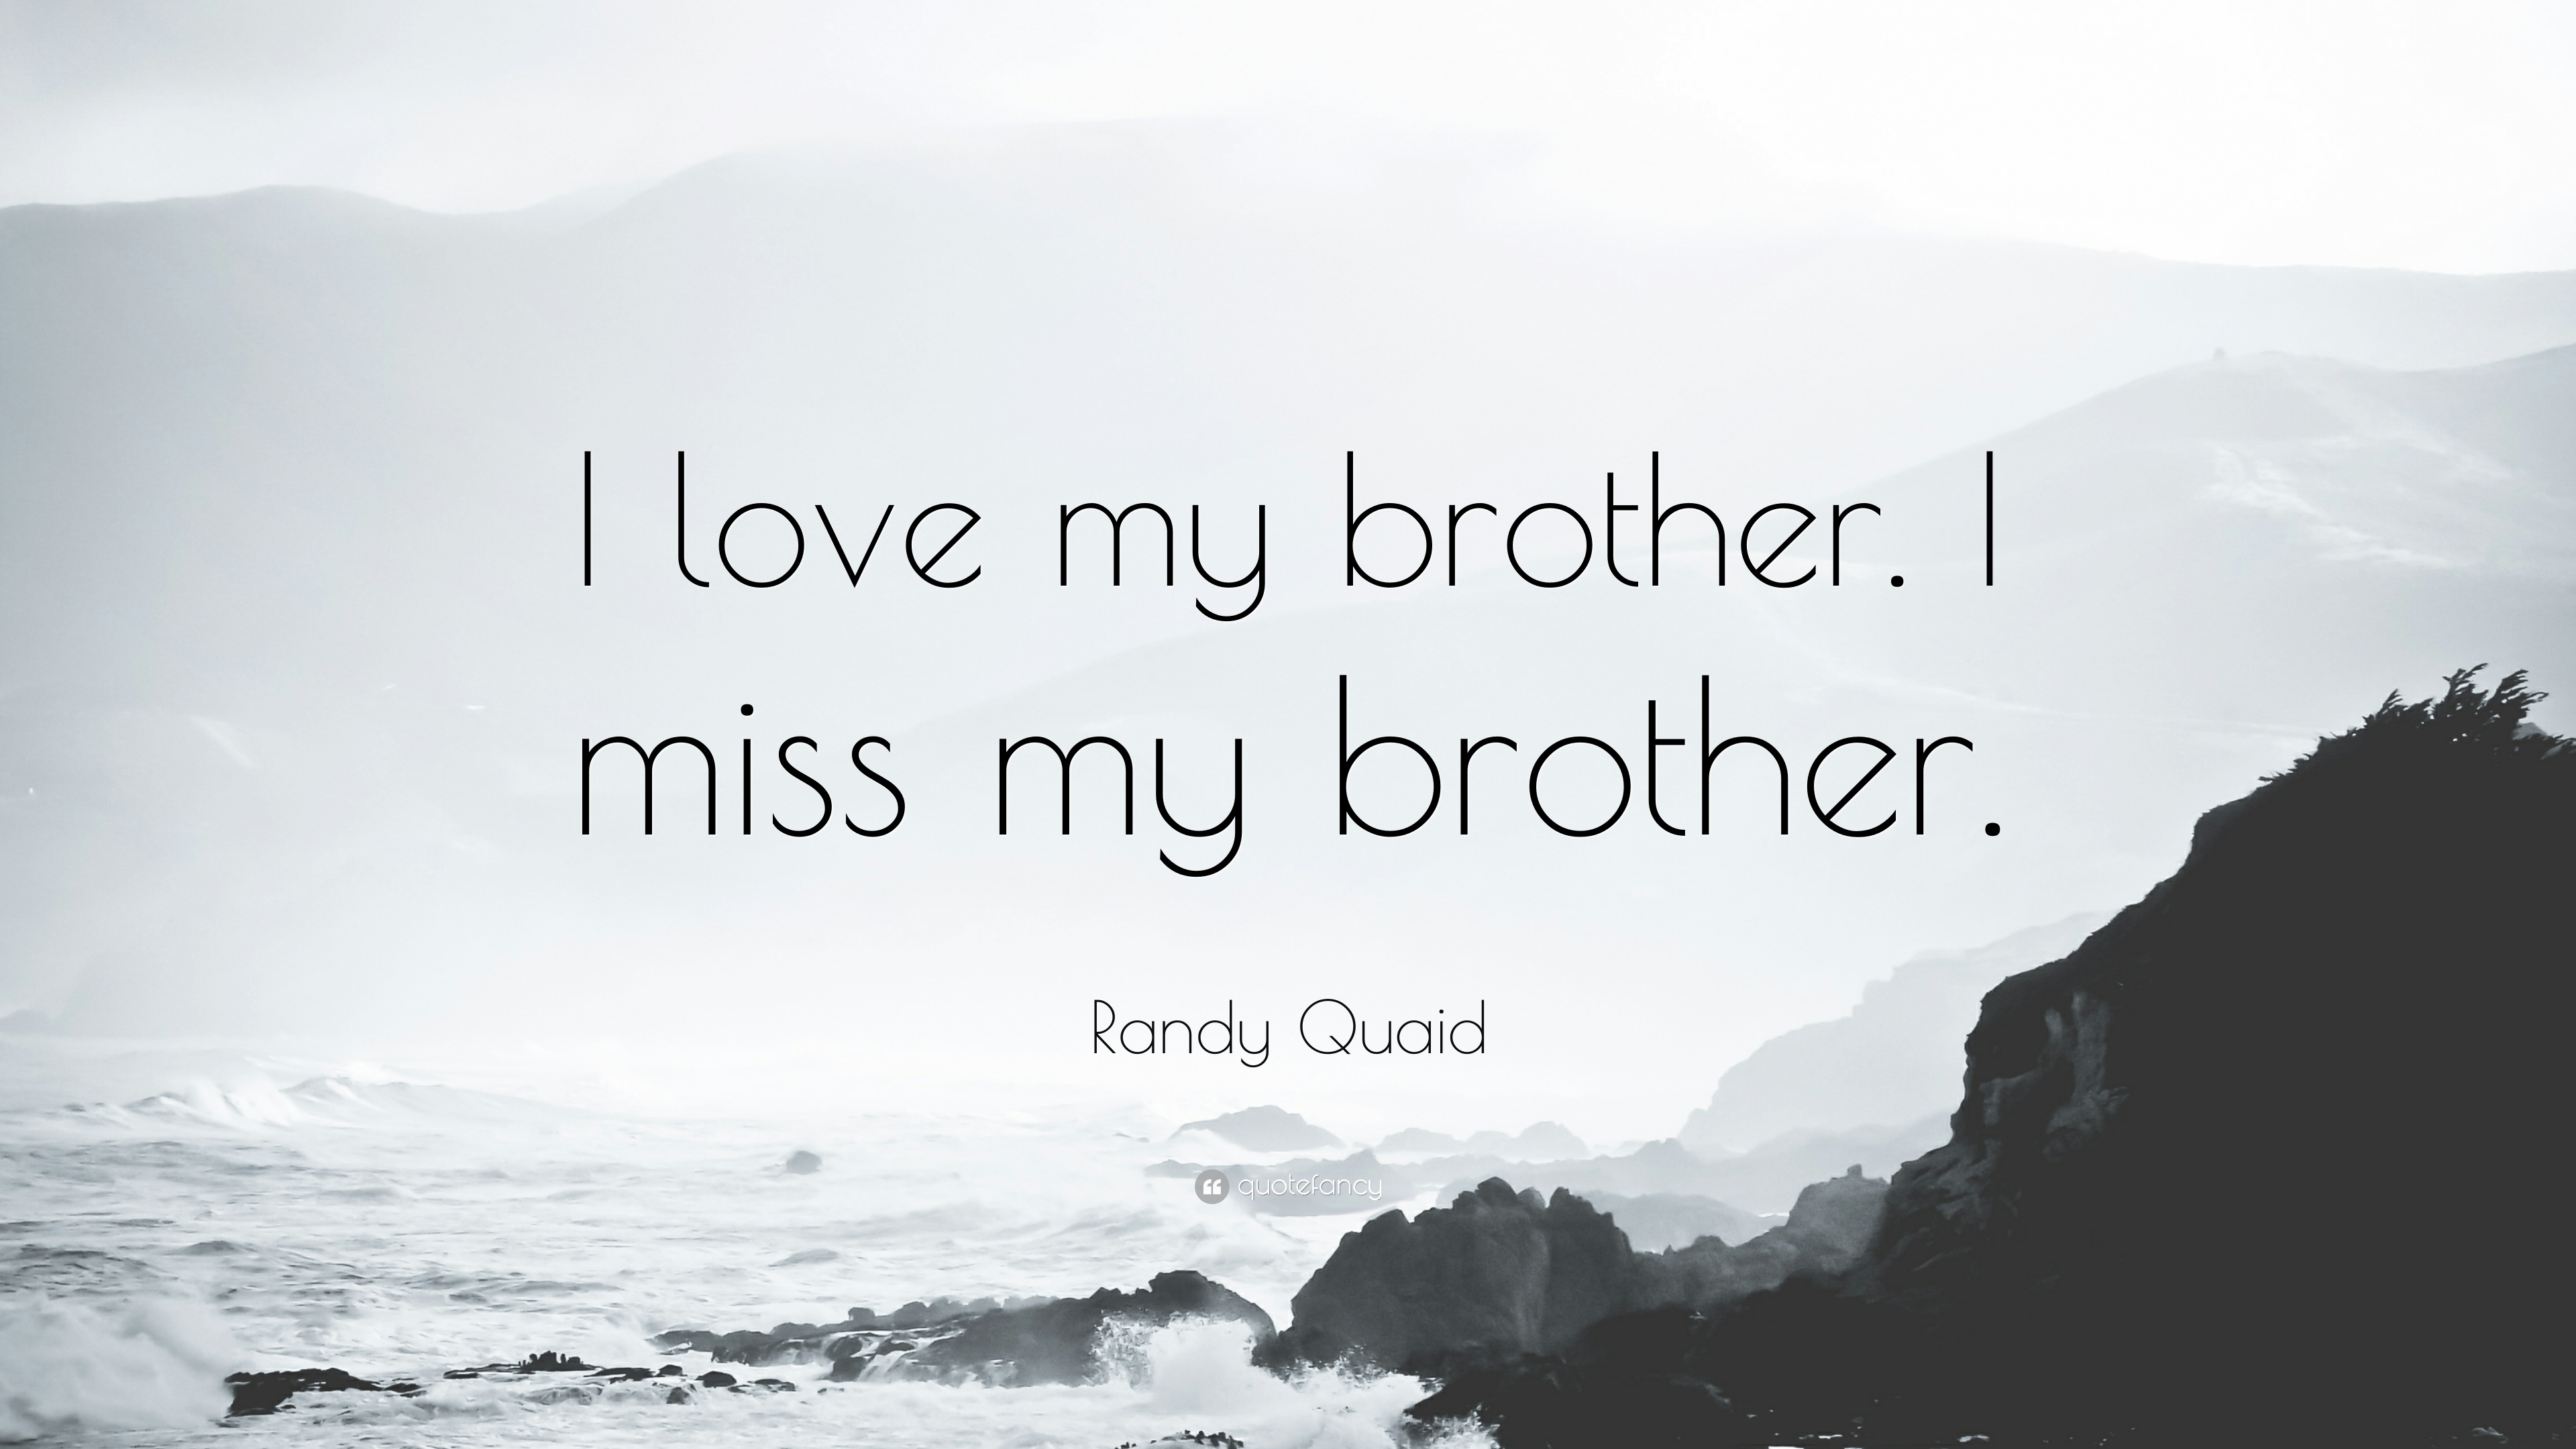 Randy Quaid Quote: “I love my brother. I miss my brother.”